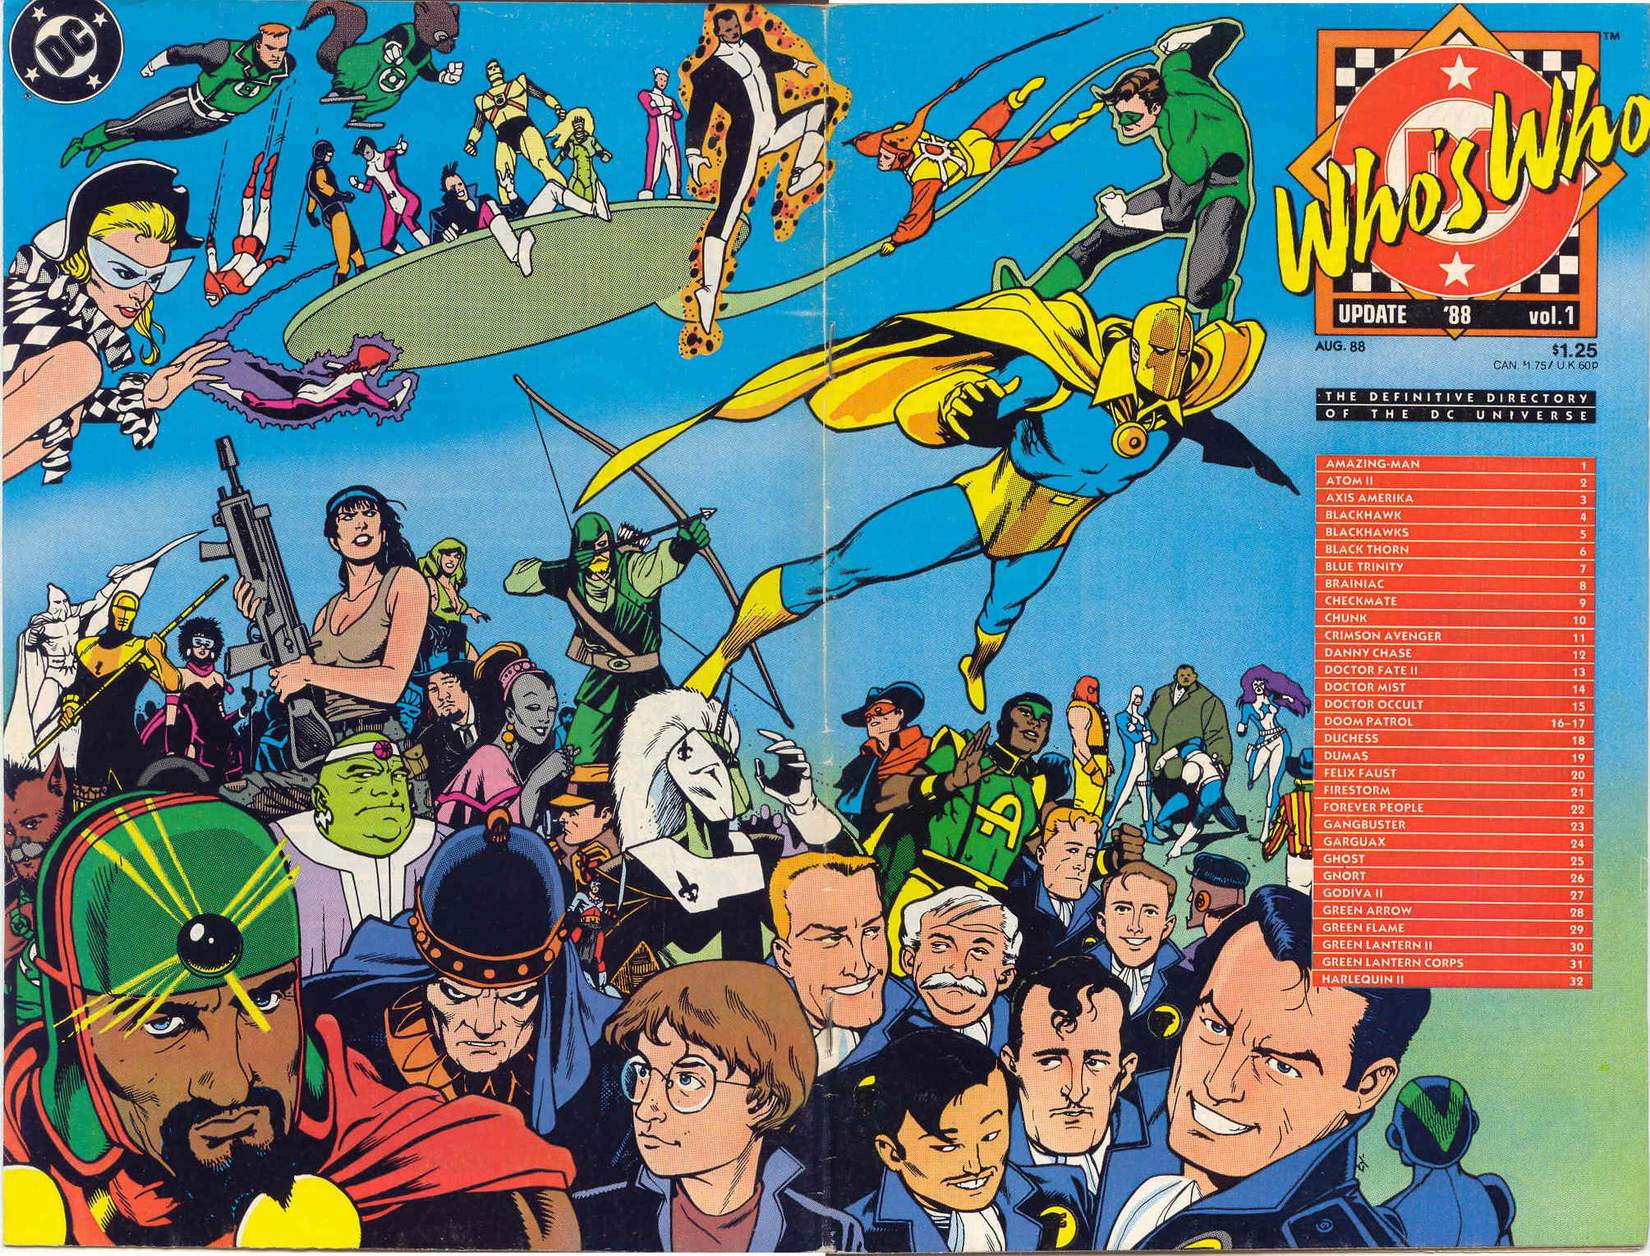 Read online Who's Who: Update '88 comic -  Issue #1 - 2